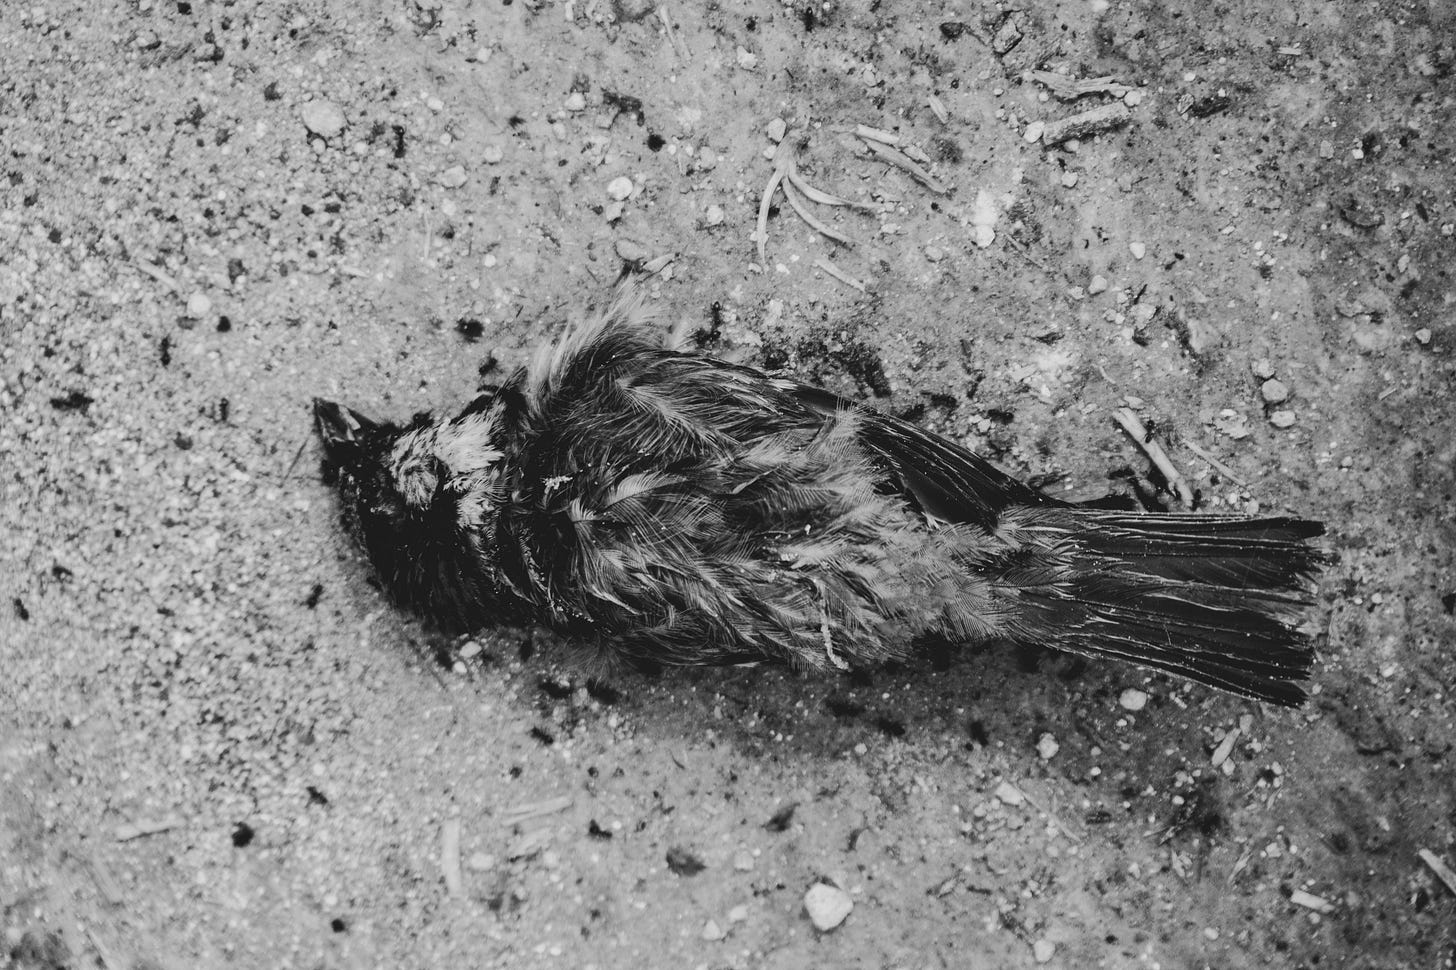 Image of a dead bird on the pavement for article titled “self annihilation” on The Reflectionist